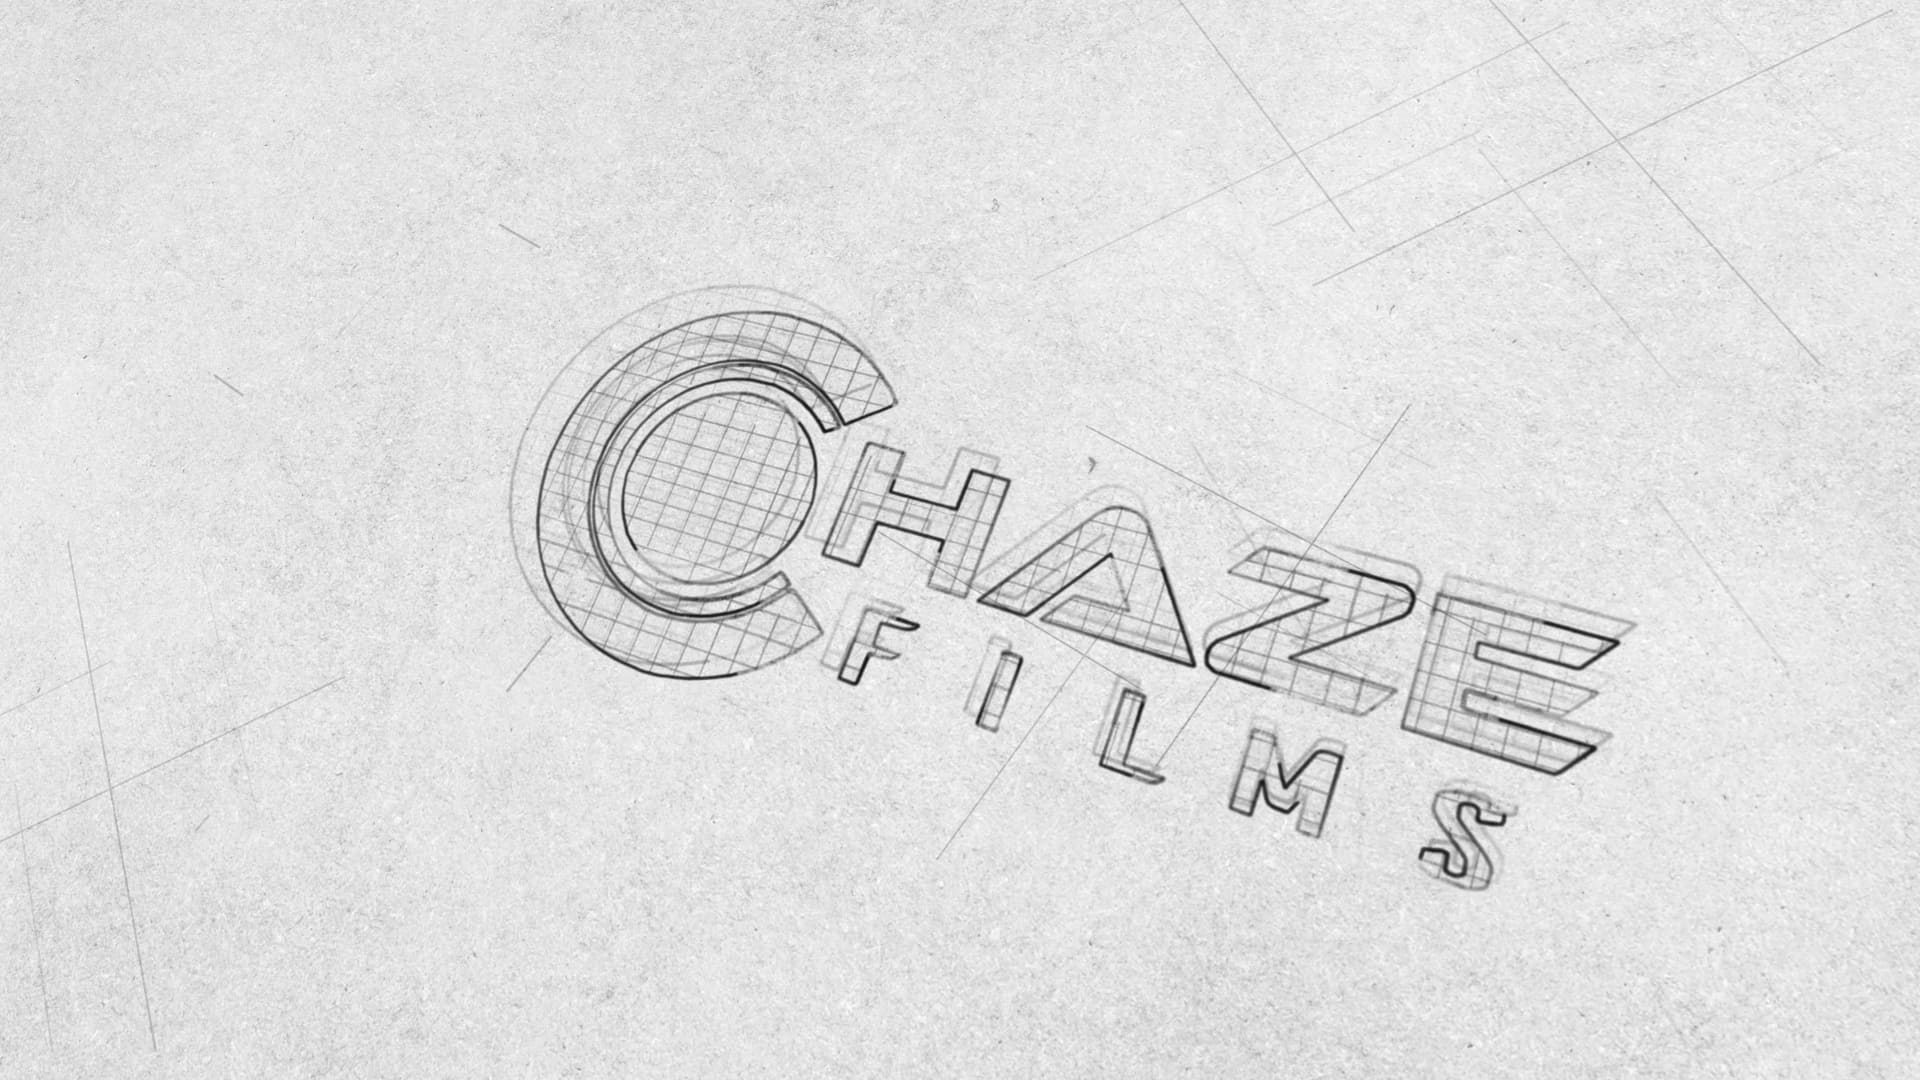 Create sketch logo animation for video intro by Chazefilms | Fiverr